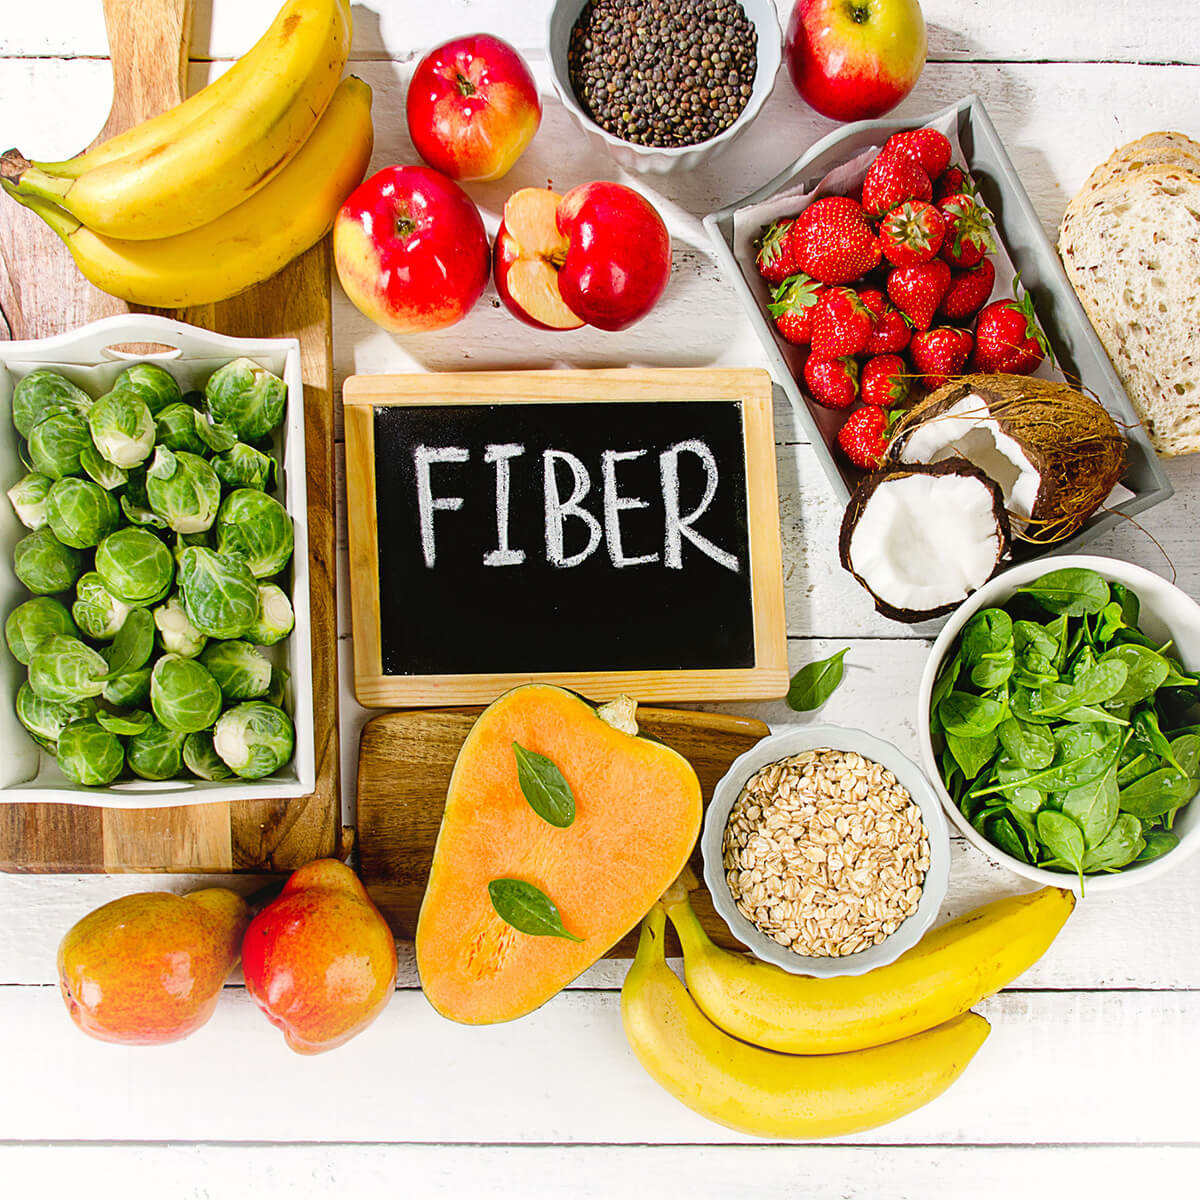 Image of fruits and vegetables high in fiber